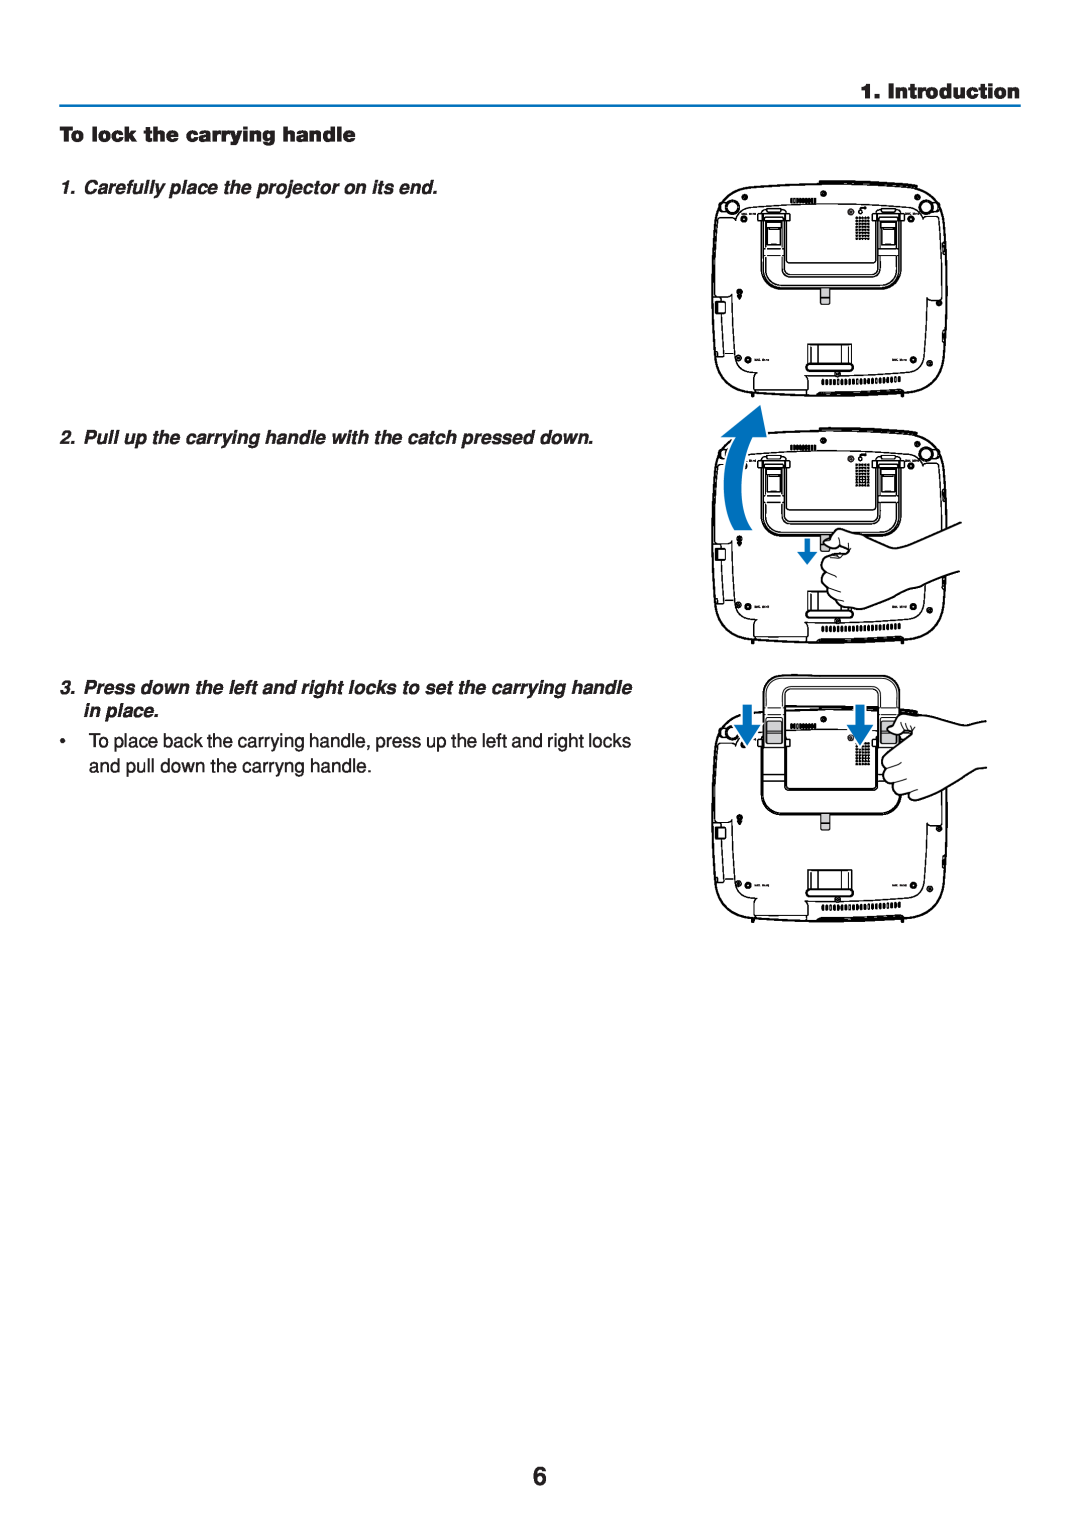 Dukane 8808 user manual Introduction To lock the carrying handle, Carefully place the projector on its end 